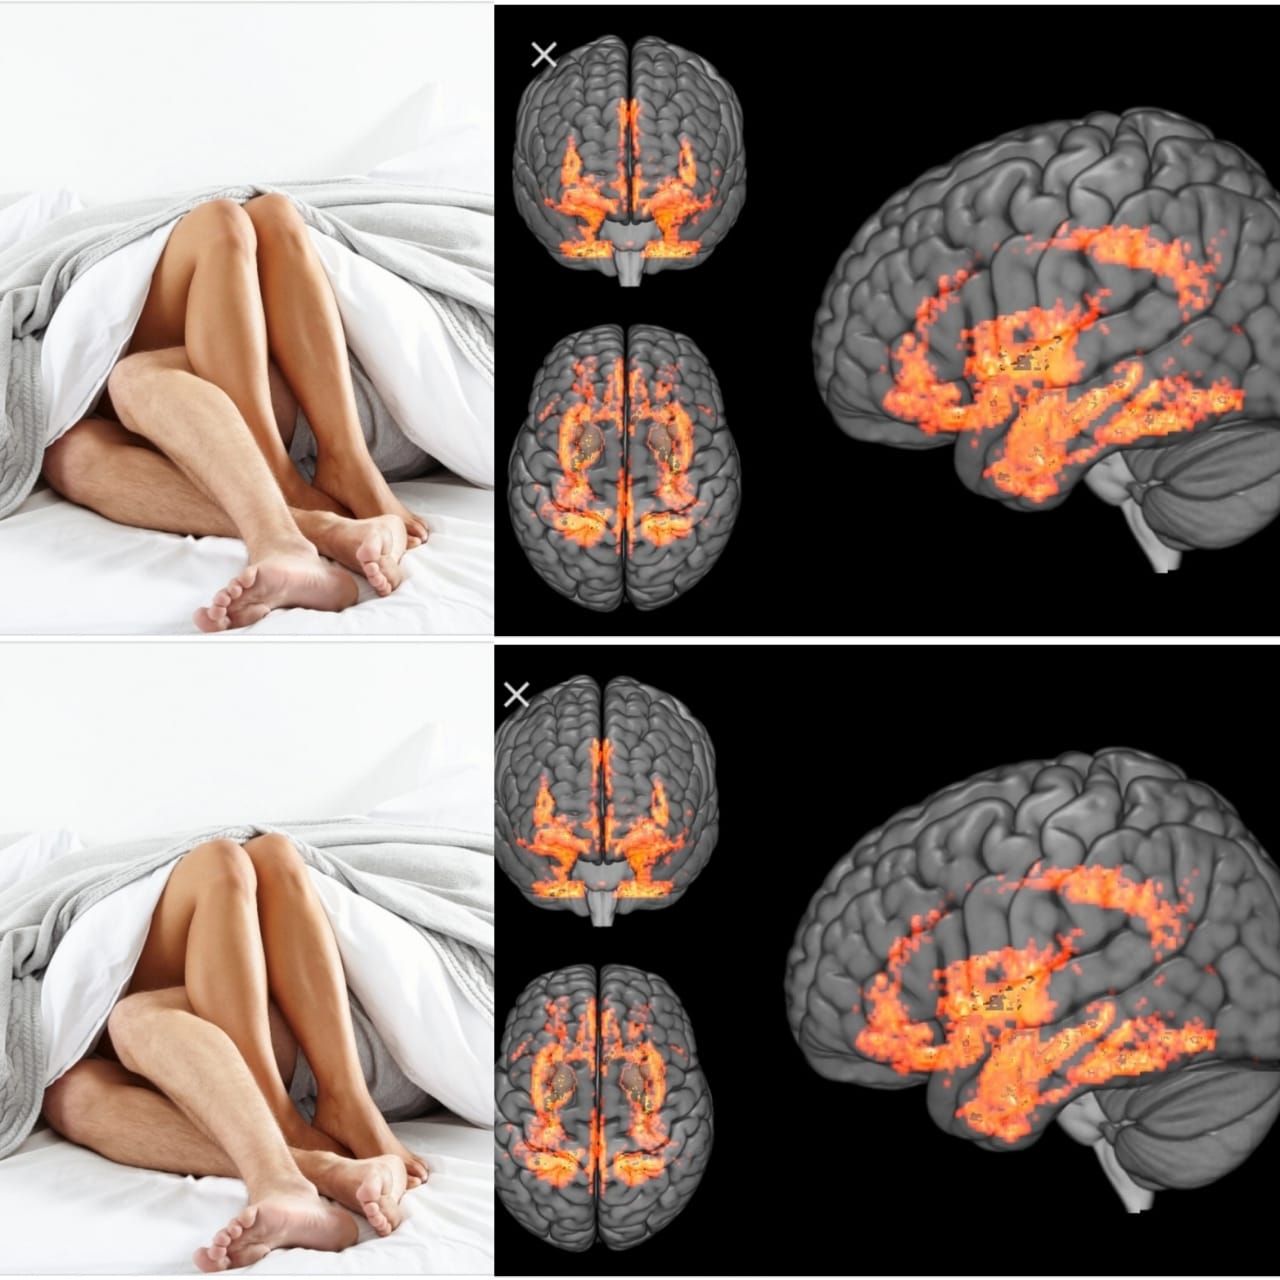 Women Who Have More S ex Have Better Developed Brains